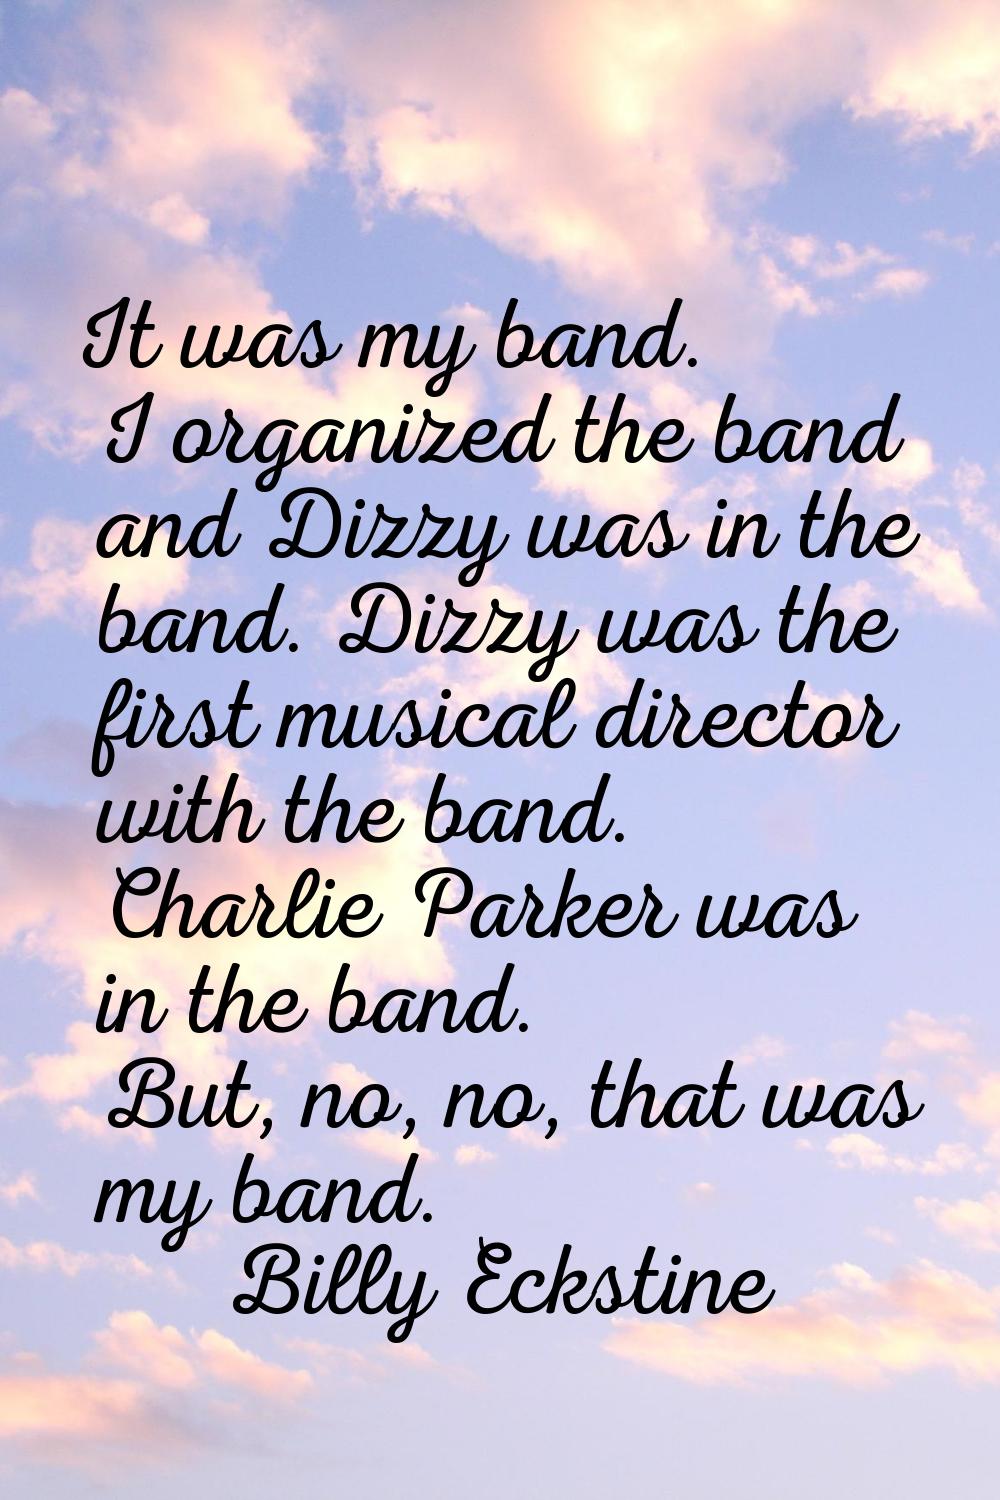 It was my band. I organized the band and Dizzy was in the band. Dizzy was the first musical directo